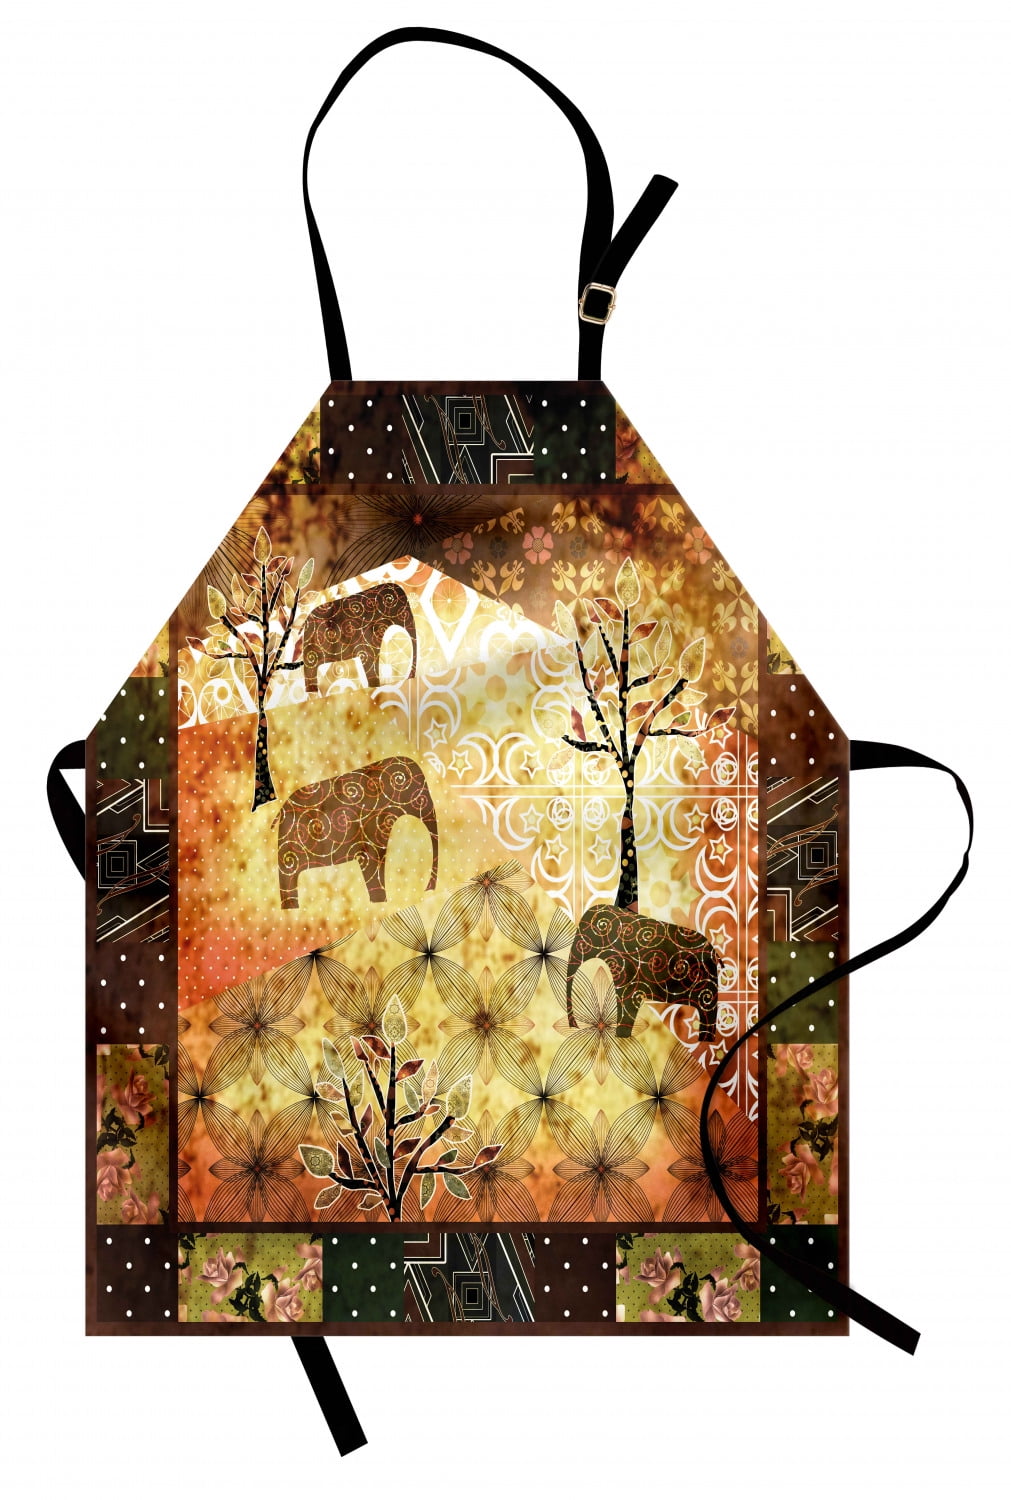 African Apron Patchwork Inspired Pattern Grunge Vintage Featured Elephants Trees Roses Print 